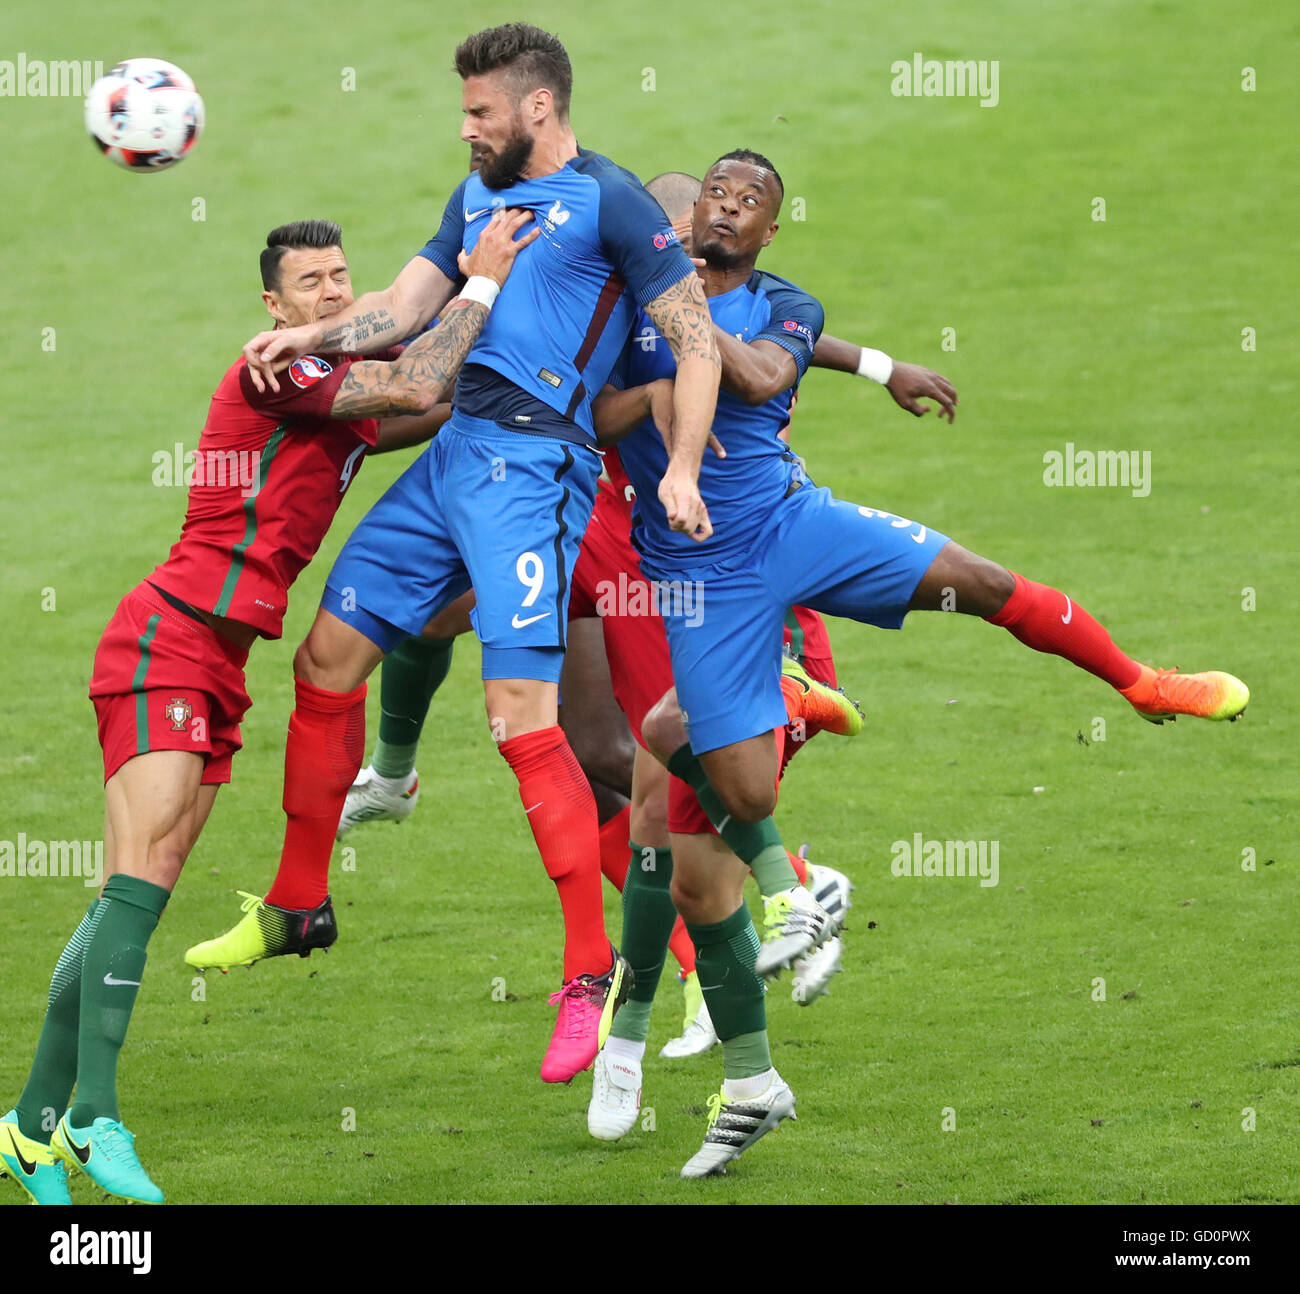 Paris, France. 10th July, 2016. Olivier Giroud (Top) of France competes during the Euro 2016 final football match between Portugal and France in Paris, France, July 10, 2016. © Bai Xuefei/Xinhua/Alamy Live News Stock Photo